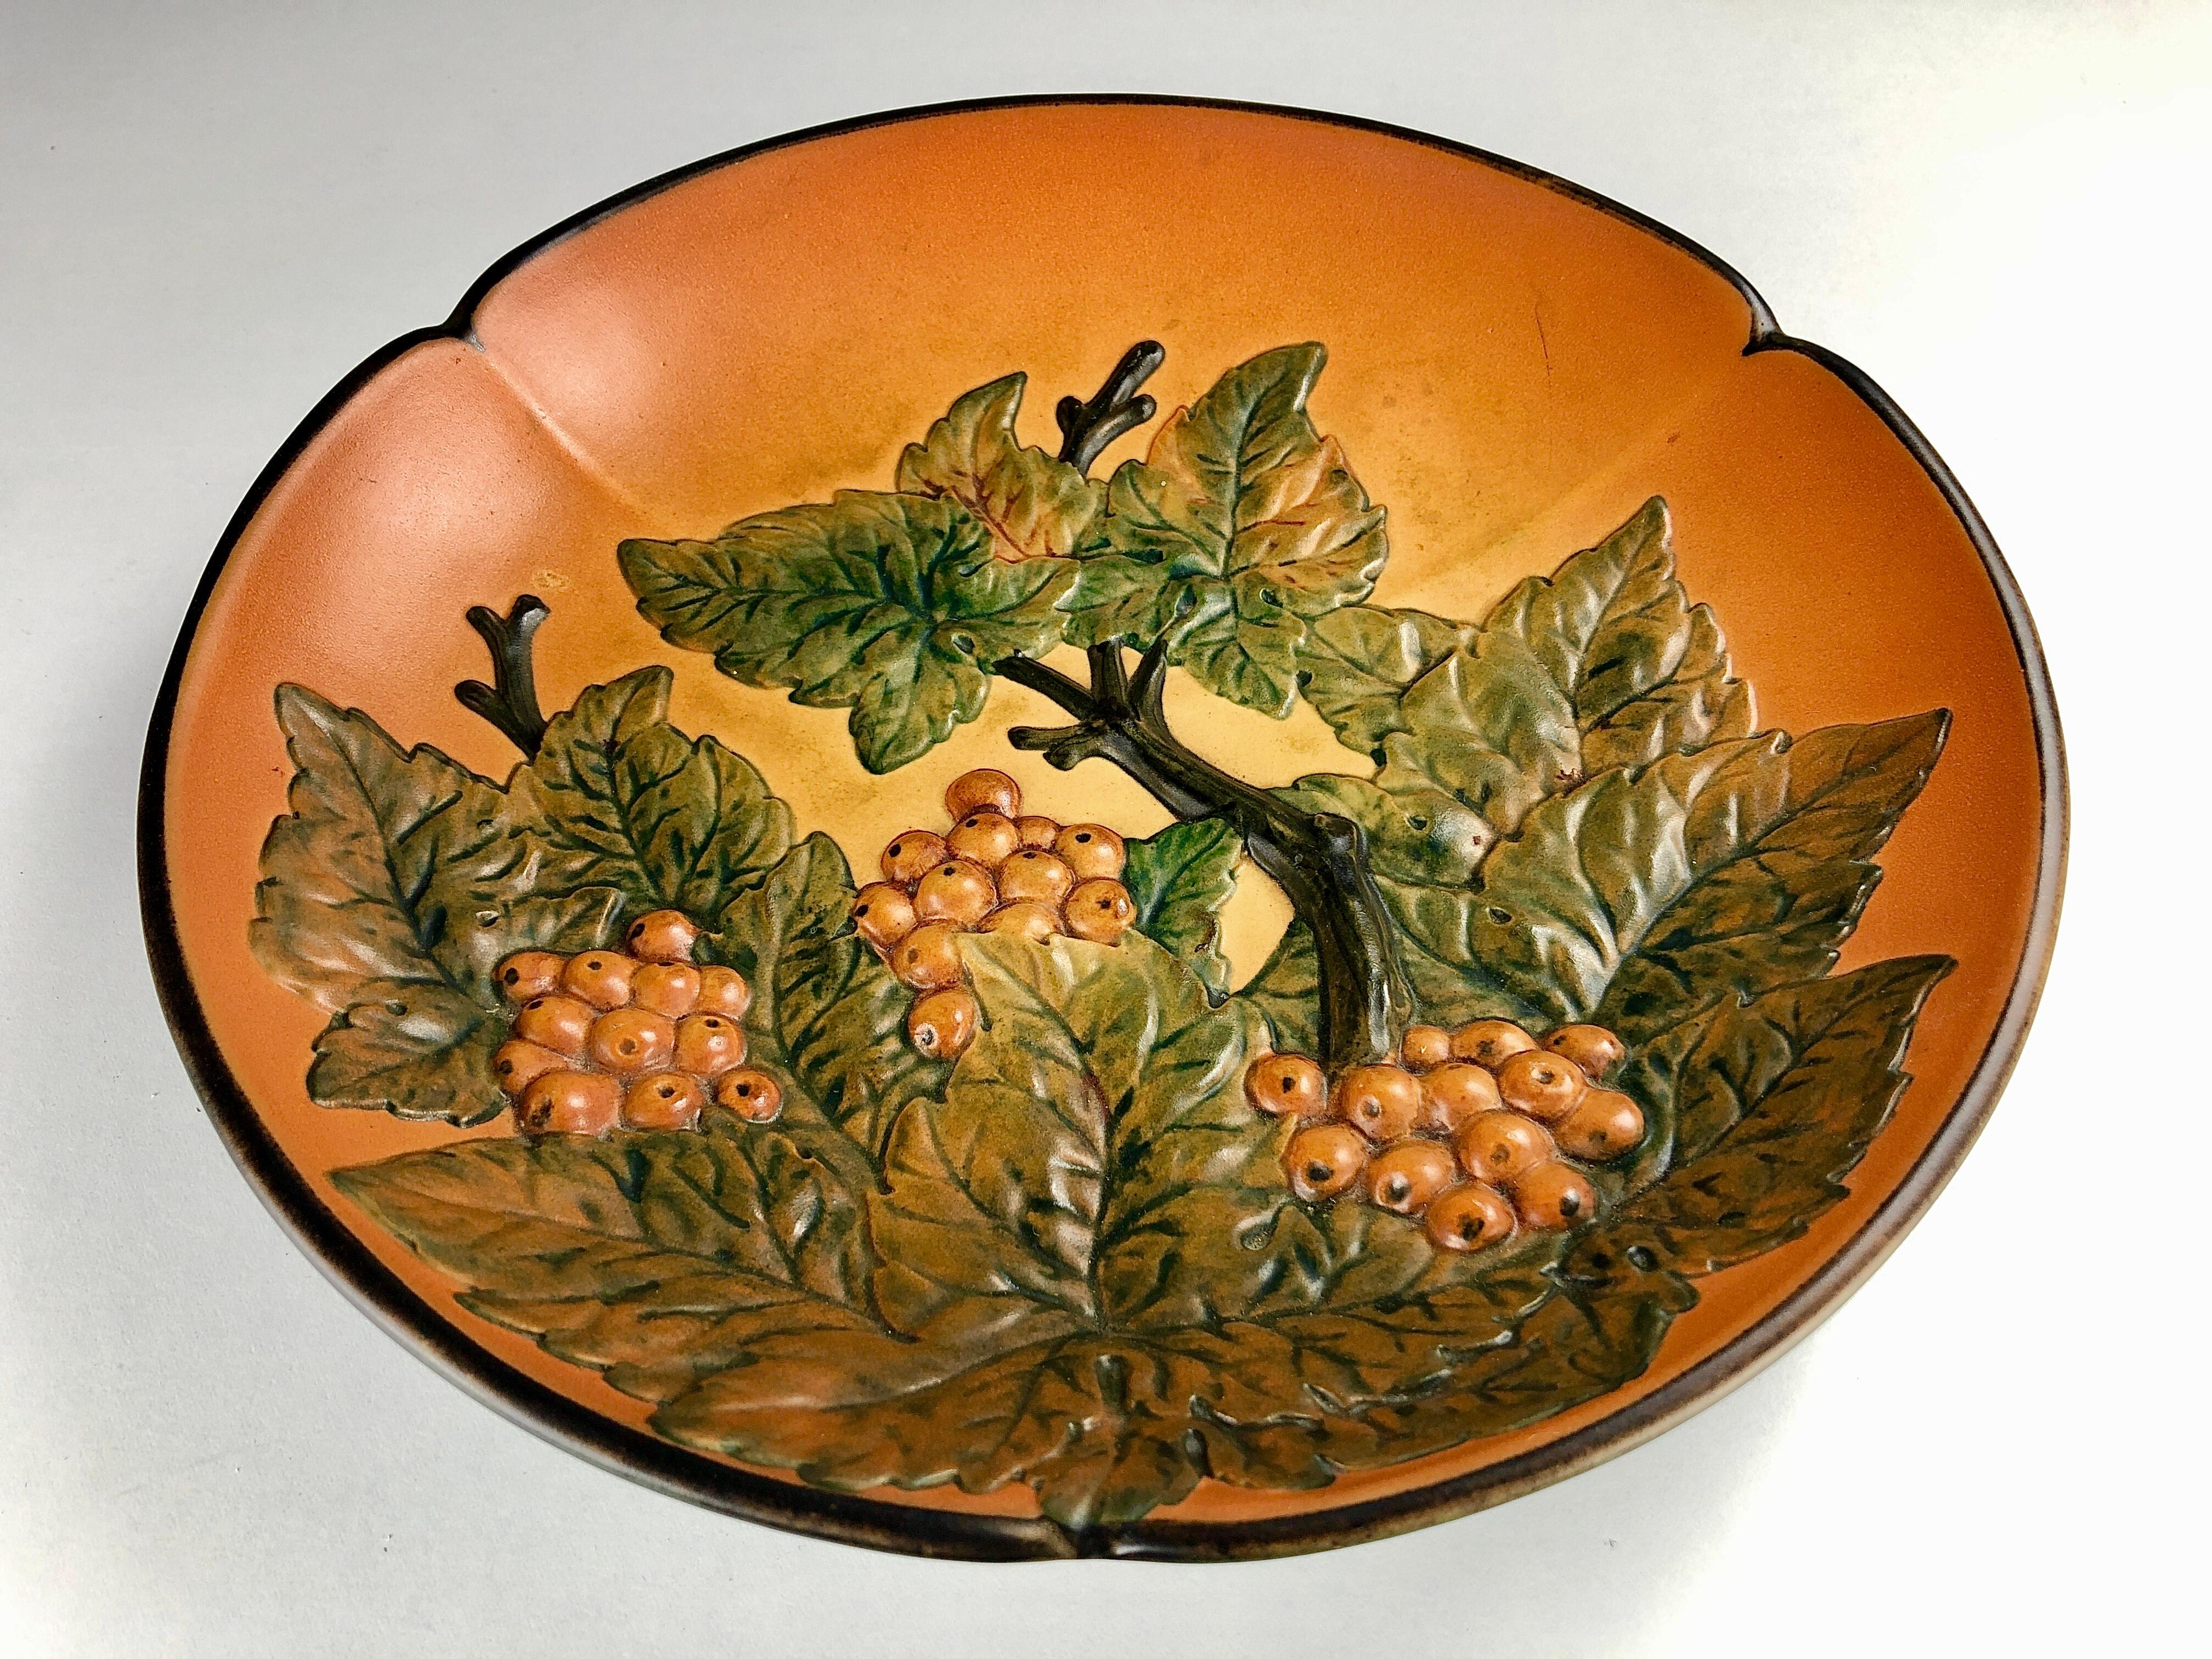 Danish decorative platter by Axel Sørensen for P. Ipsens Enke 1939

The platter feature a branch of lively colorfull rowanberries is in very good vintage condition.

Ipsens Enke (1843 - 1955) was a very succesfull company that especially during the